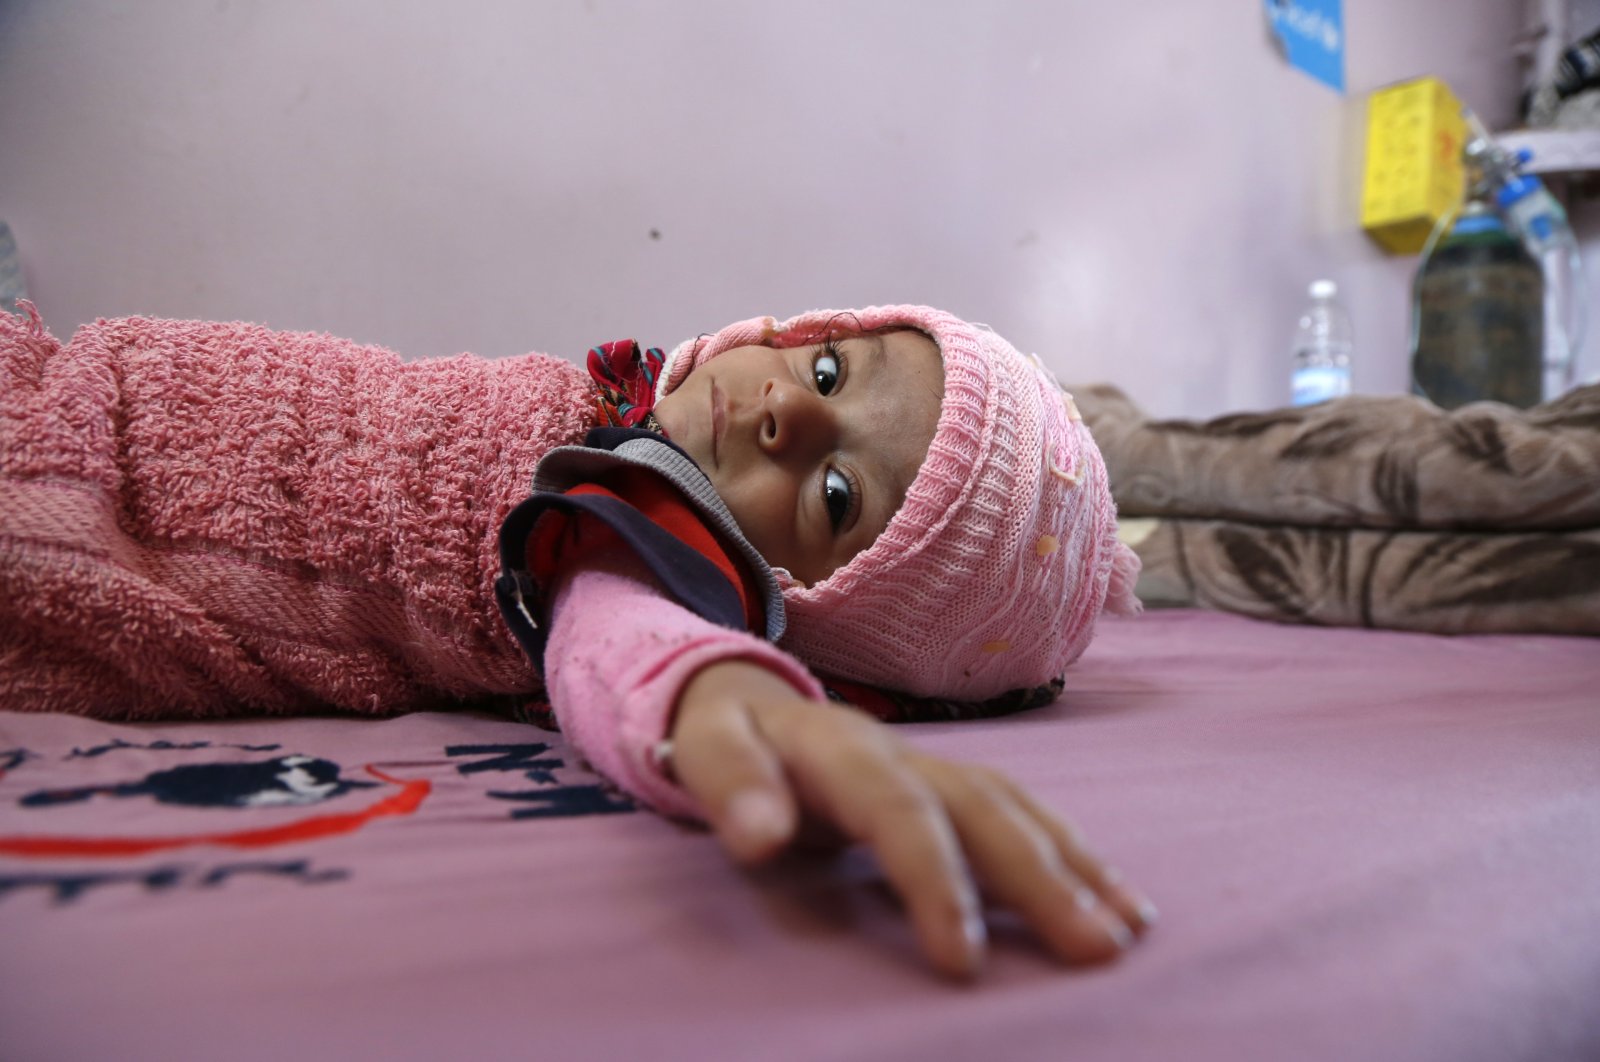 A malnourished Yemeni child lies on a bed while receiving treatment at a hospital in Sanaa, Yemen, Jan. 26, 2021. (Photo by Getty Images)